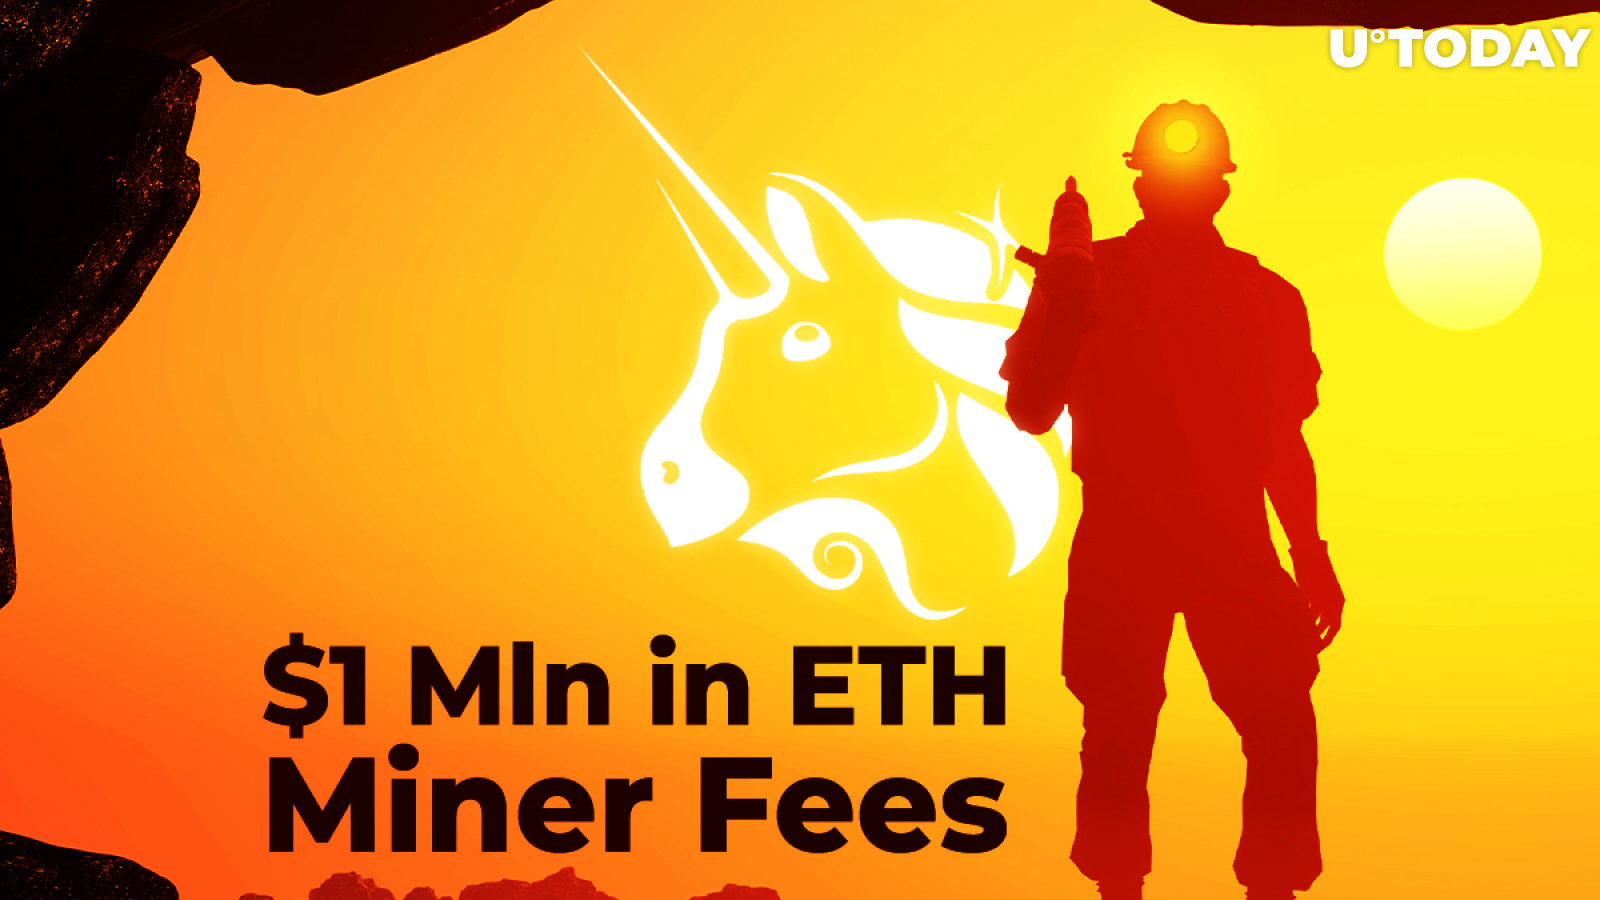 $1 Mln in ETH Miner Fees Spent in One Hour After Uniswap Airdropped Free UNI on Users